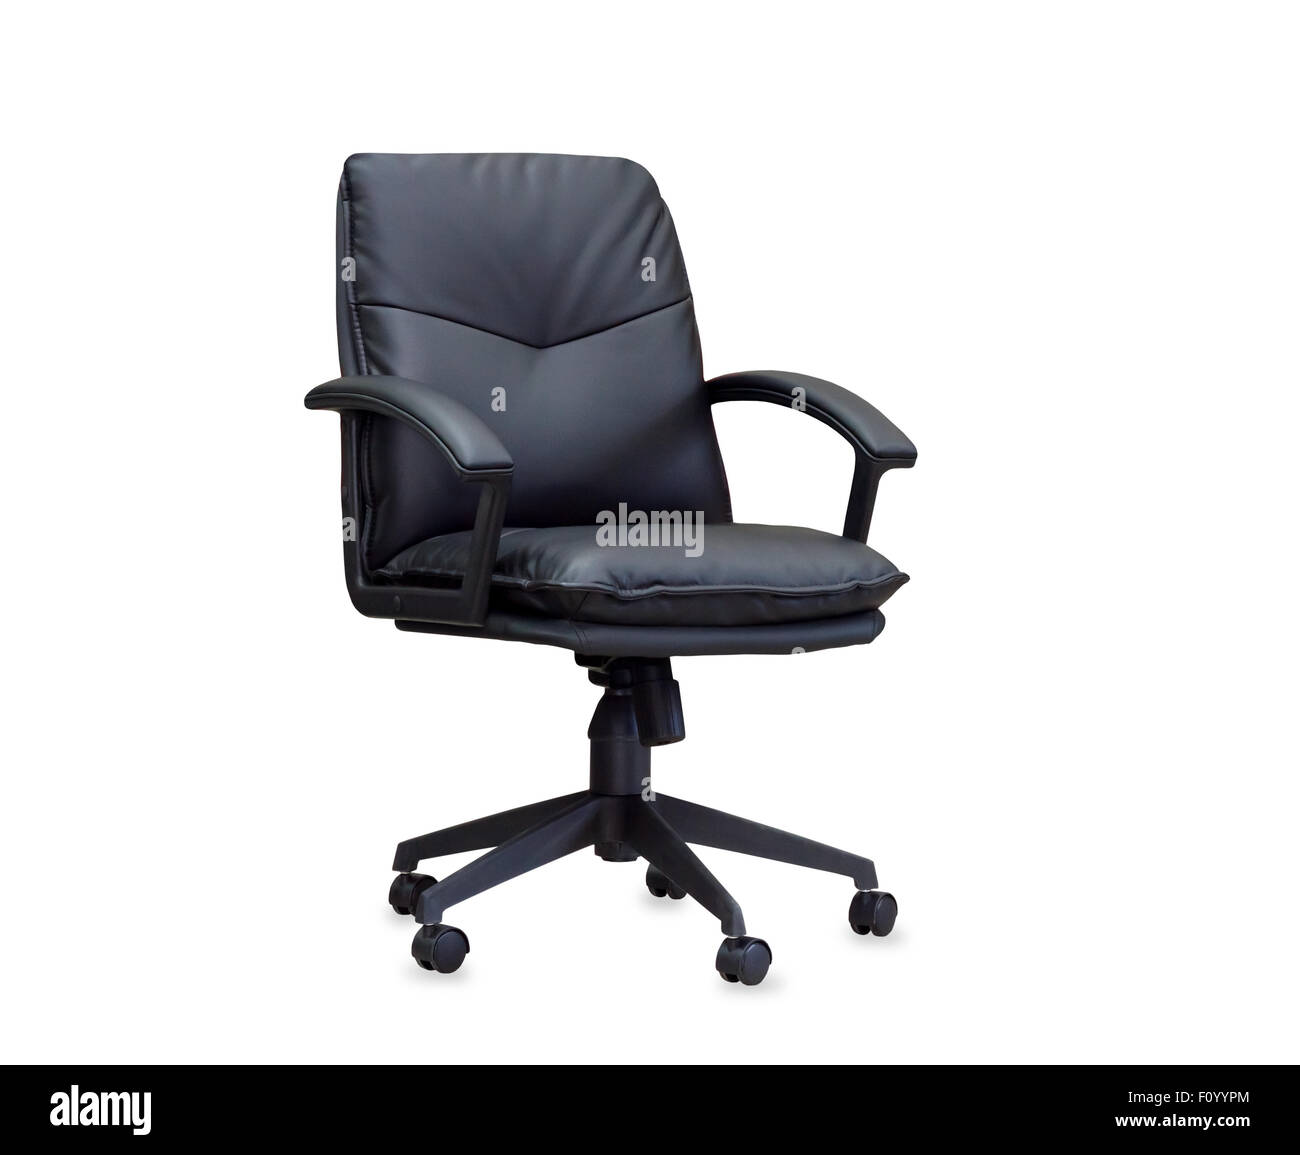 The office chair from black leather. Isolated Stock Photo